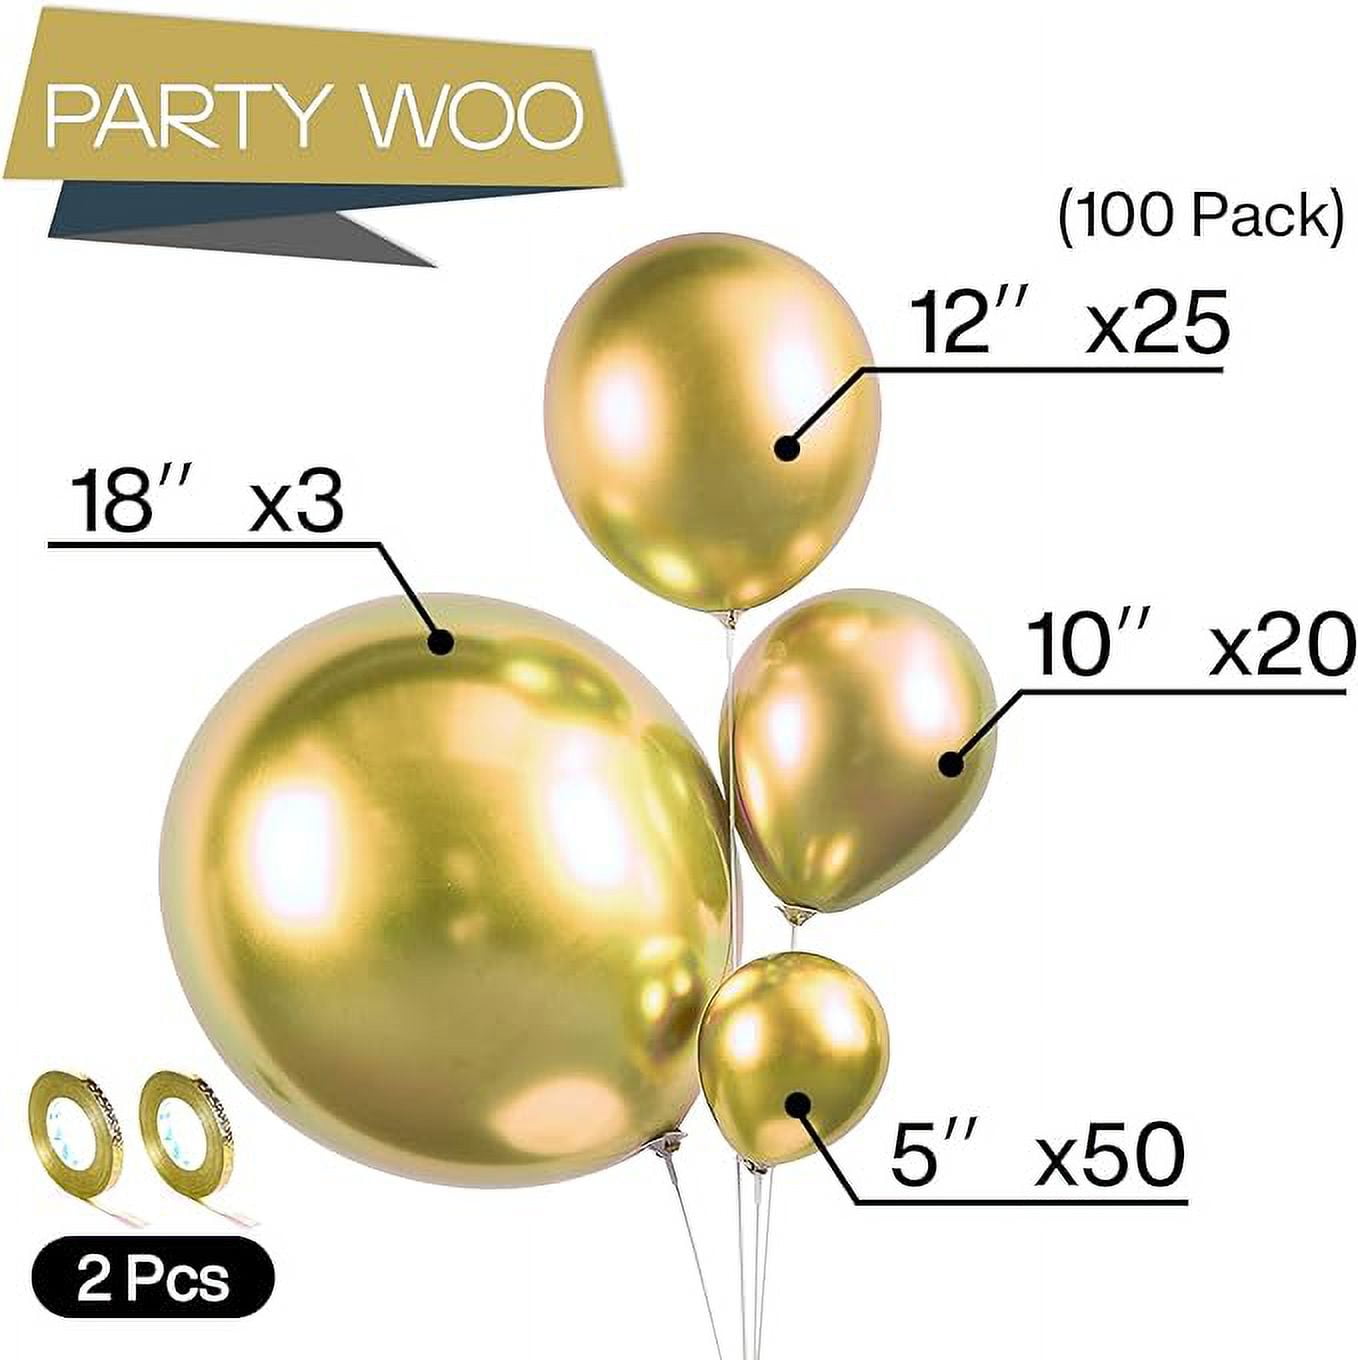 PartyWoo Pale Pink Balloons, 100 pcs Pink Balloons Different Sizes Pack of  18 Inch 12 Inch 10 Inch 5 Inch Pink Latex Balloons for Balloon Garland  Balloon Arch as Birthday Party Decorations, Pink-Q01 